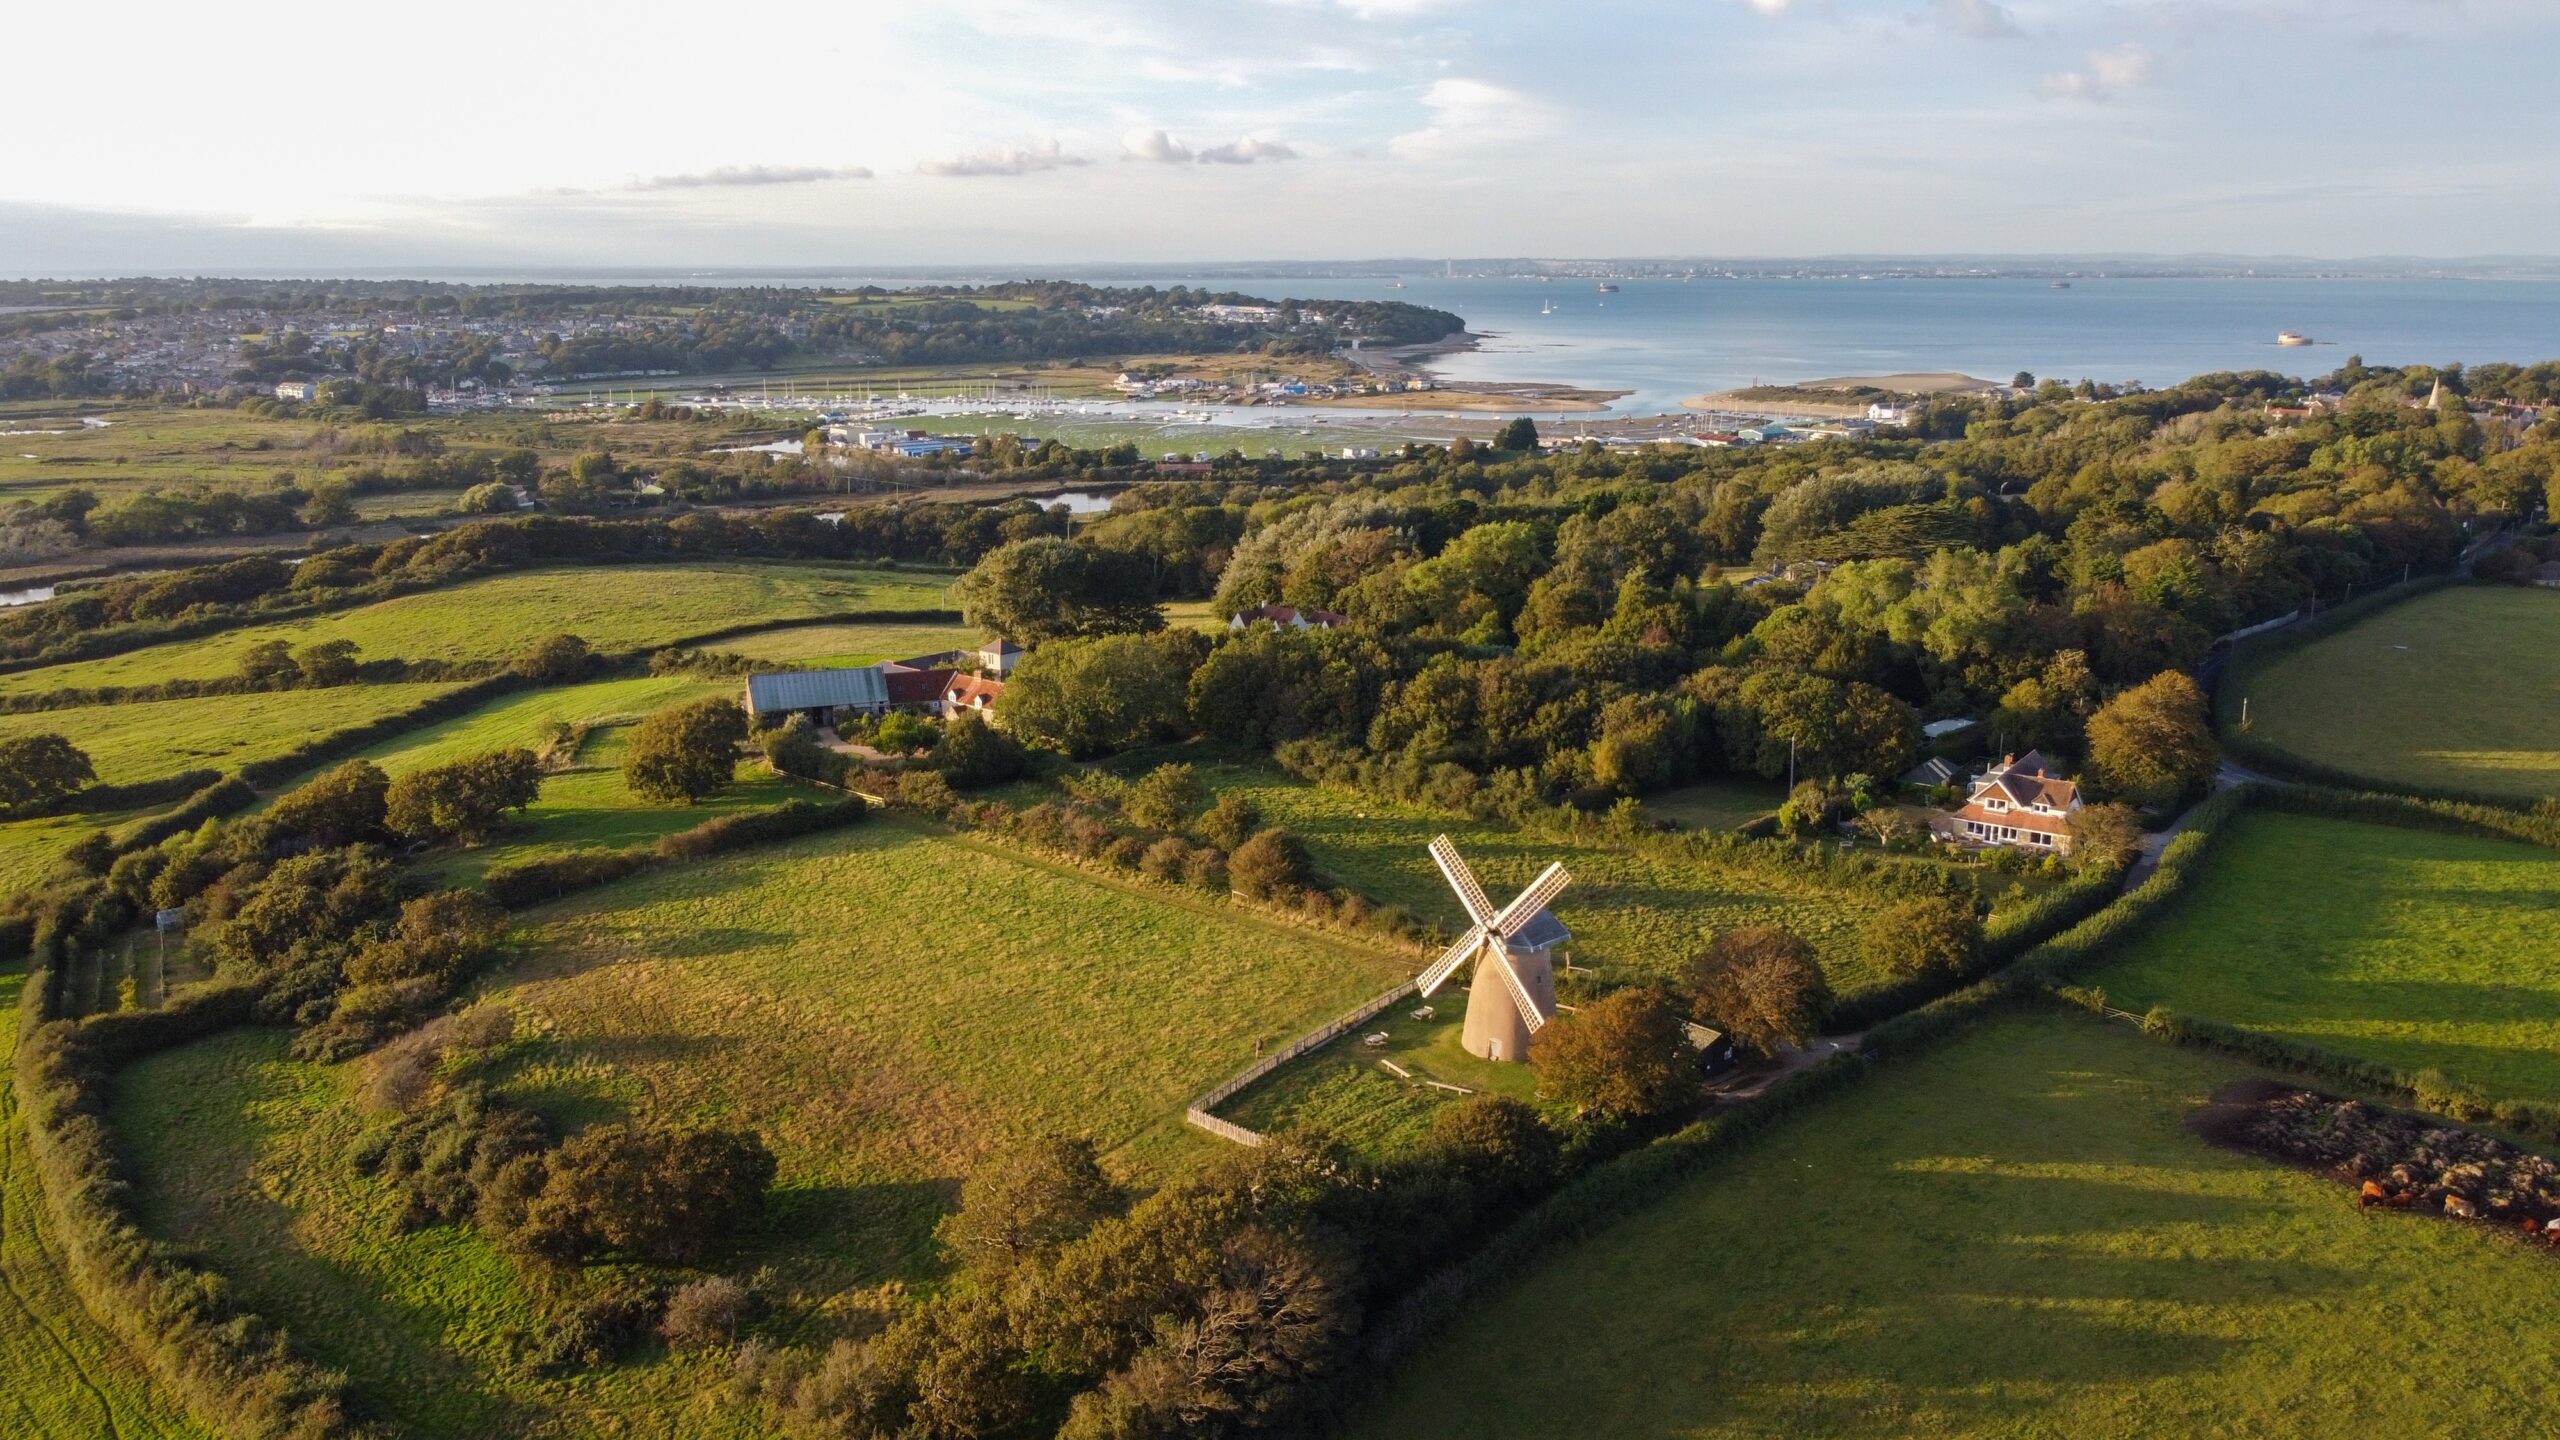 Smart solutions could create network capacity and enable new renewable generation on the Isle of Wight